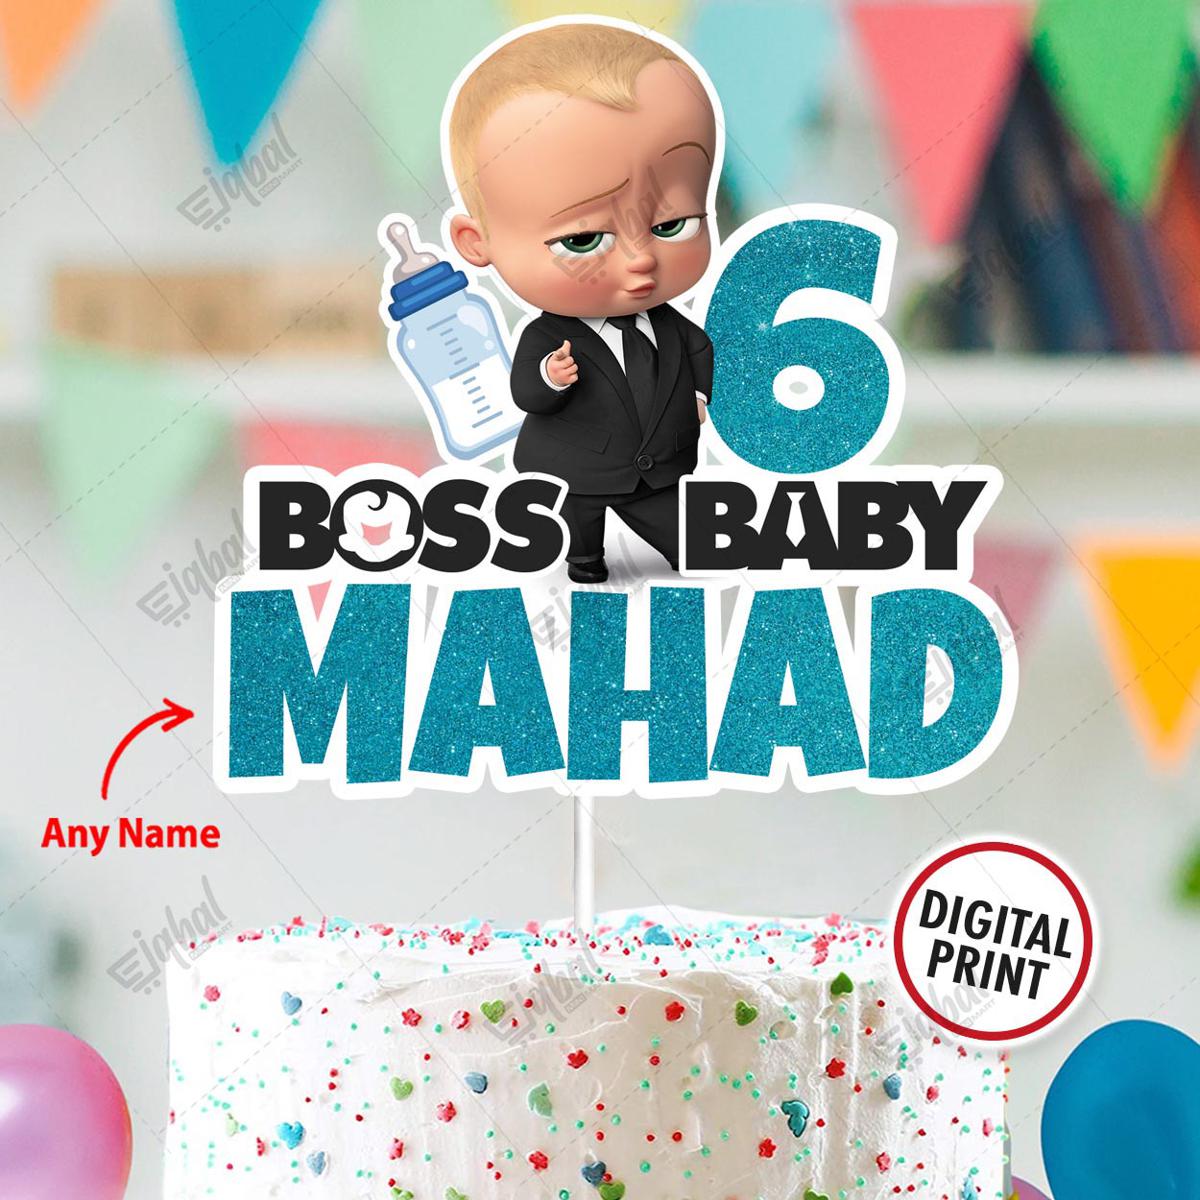 Zyozique 10 Pcs Boss Baby Cupcake Toppers 1st Birthday Cake Decorations For Boss  Baby Themed 1st Birthday Party Decorations Baby Shower Supplies And |  idusem.idu.edu.tr